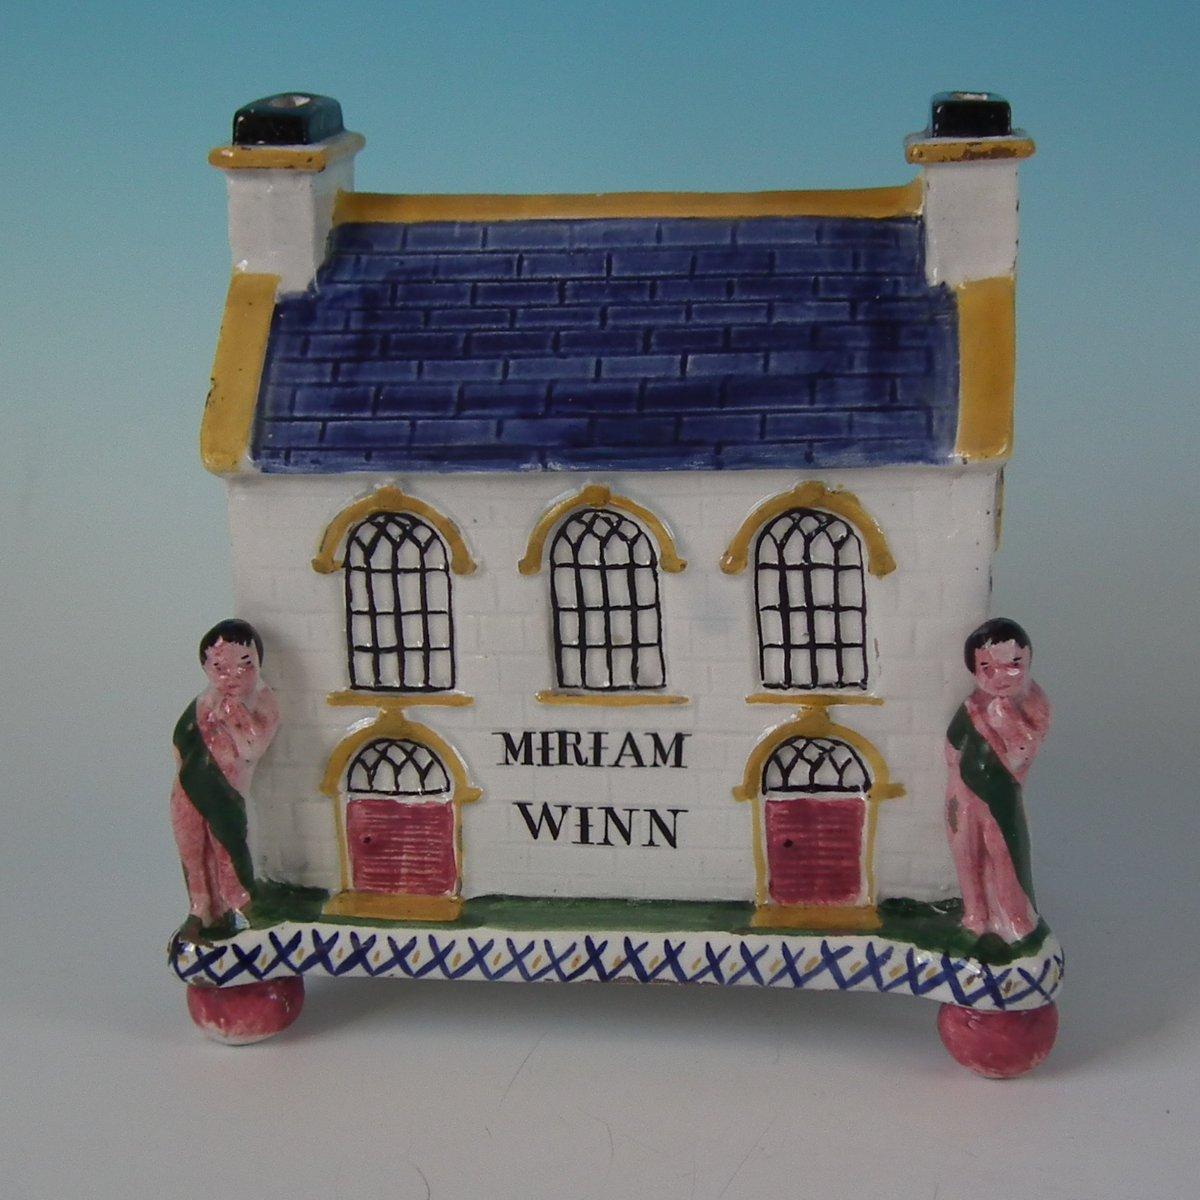 Staffordshire Pottery Yorkshire money box which features Mexborough Chapel - with the box owners name, 'MIRIAM WINN', printed on the front. Flanked by two figures standing either side of the front doors, stood on a rectangular footed base. Coin slot